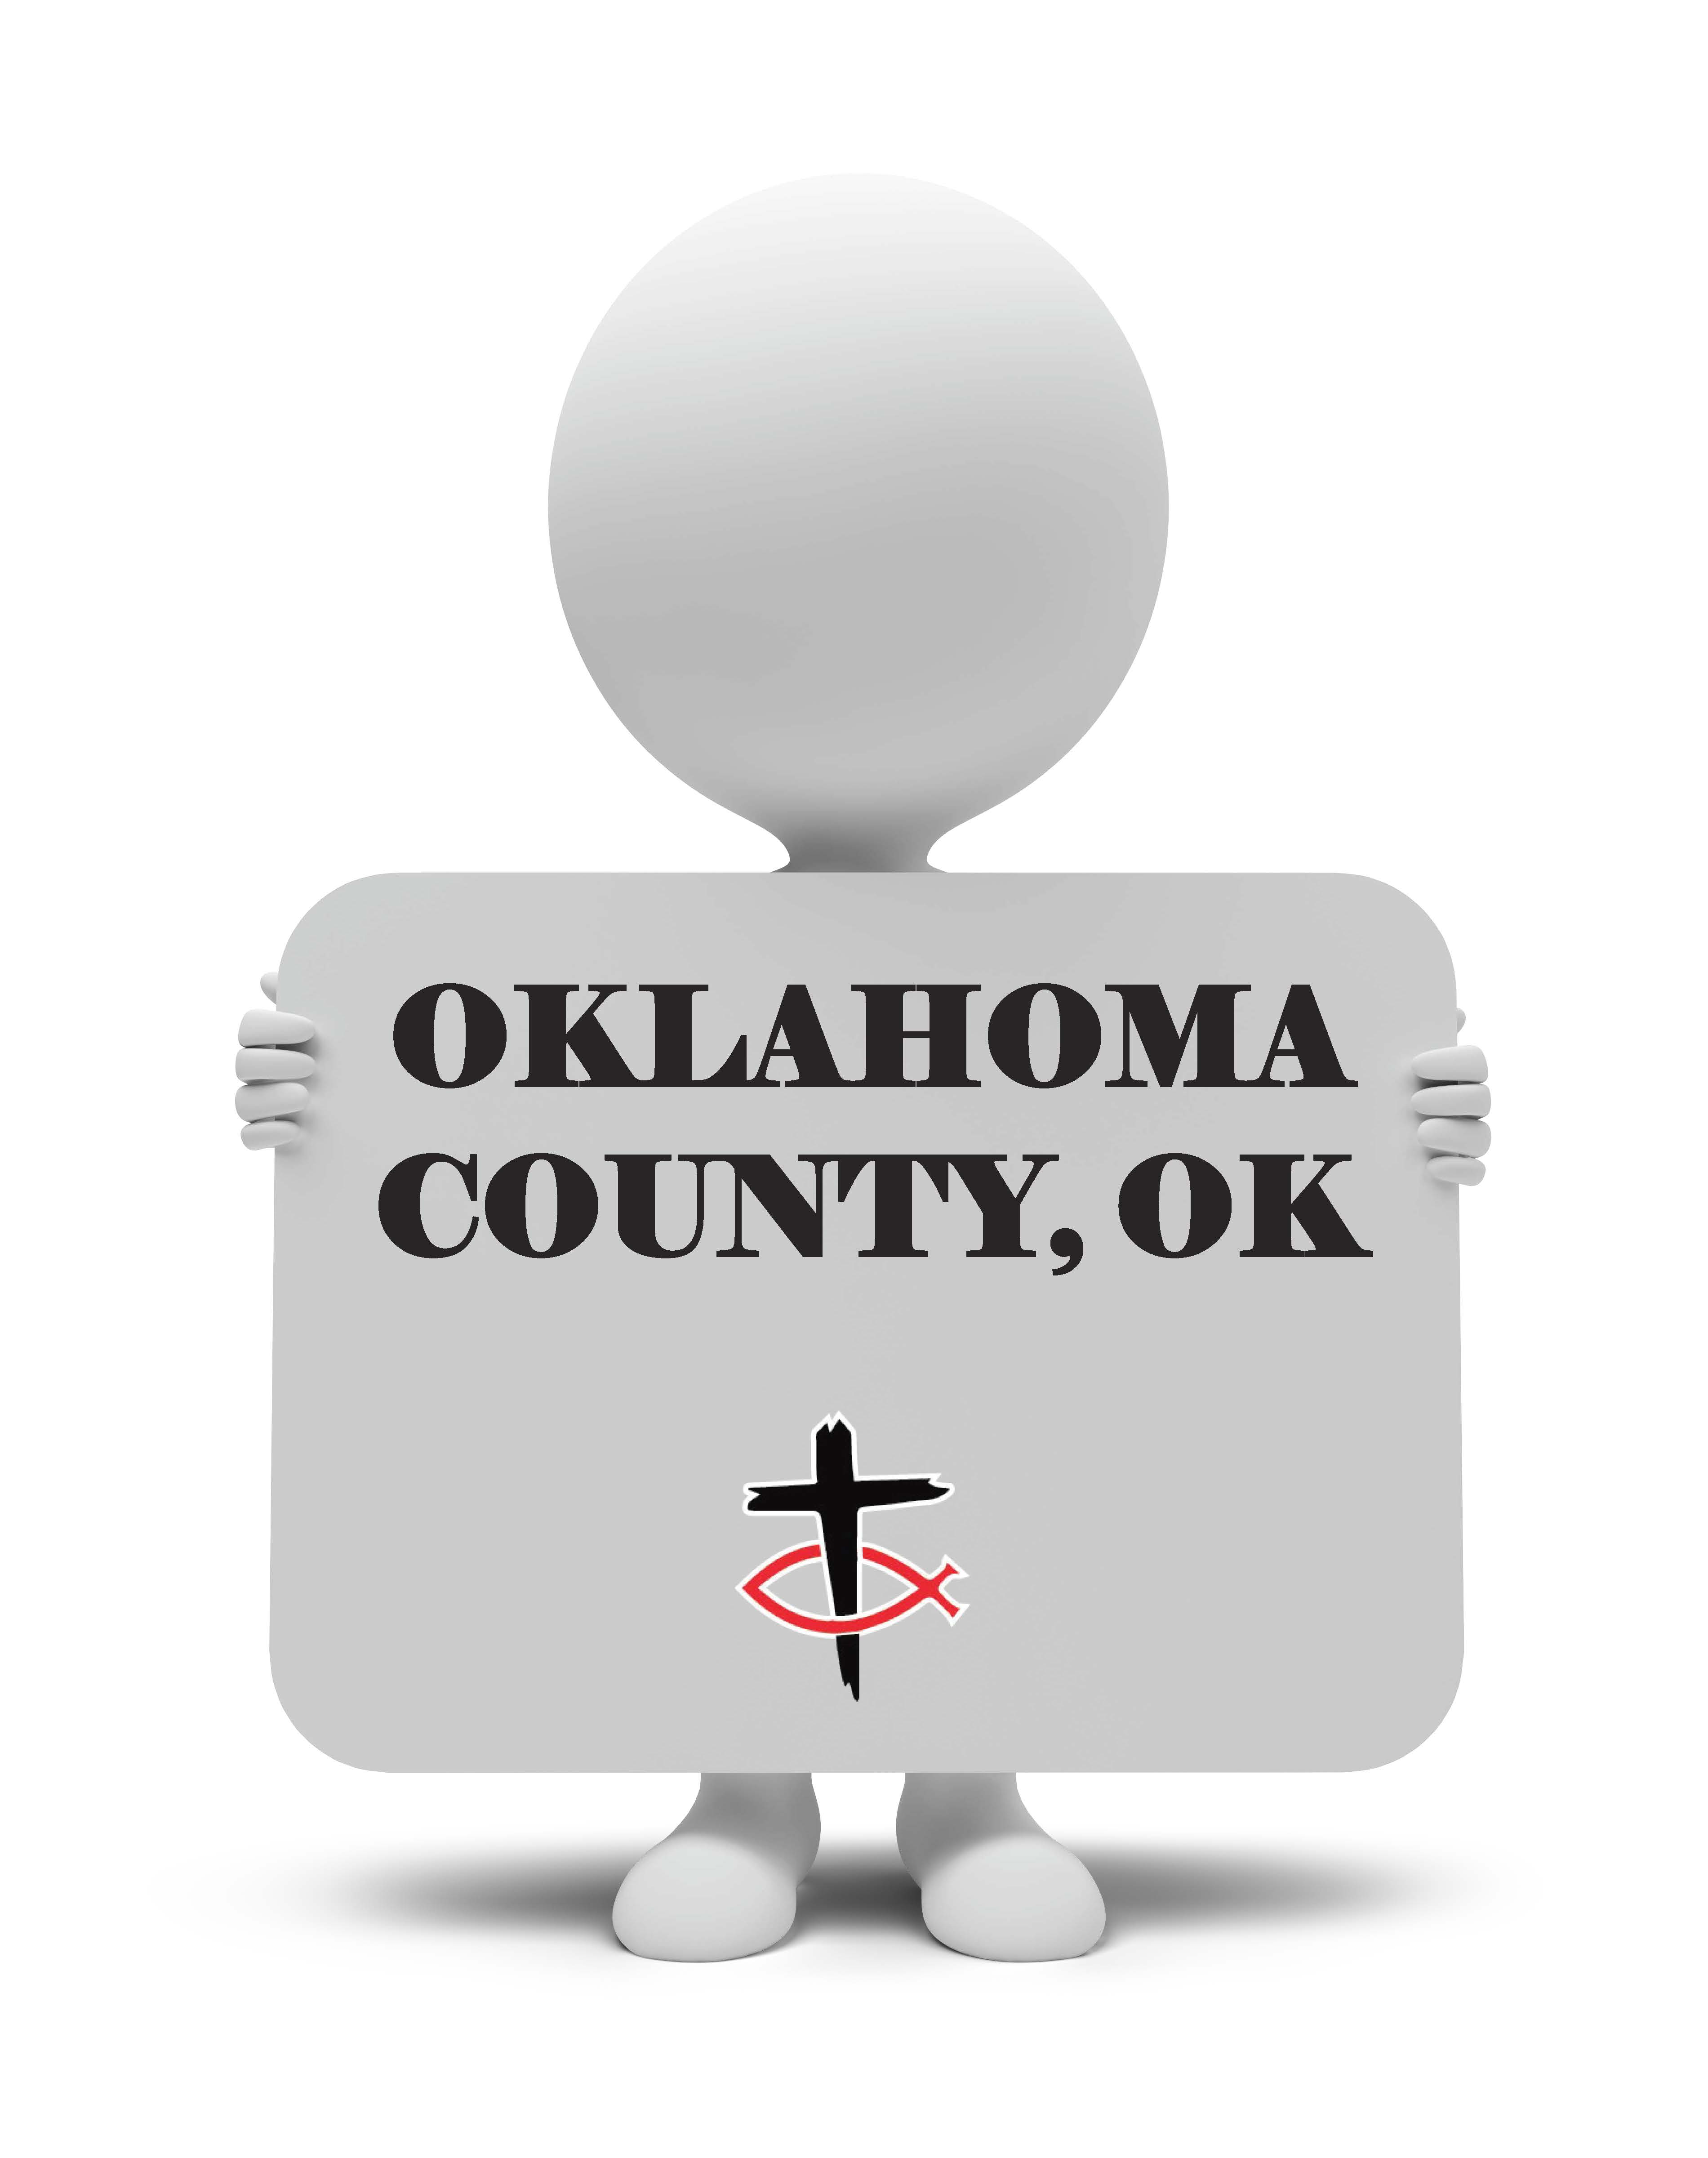 pick up the christian business print guide in oklahoma county ok